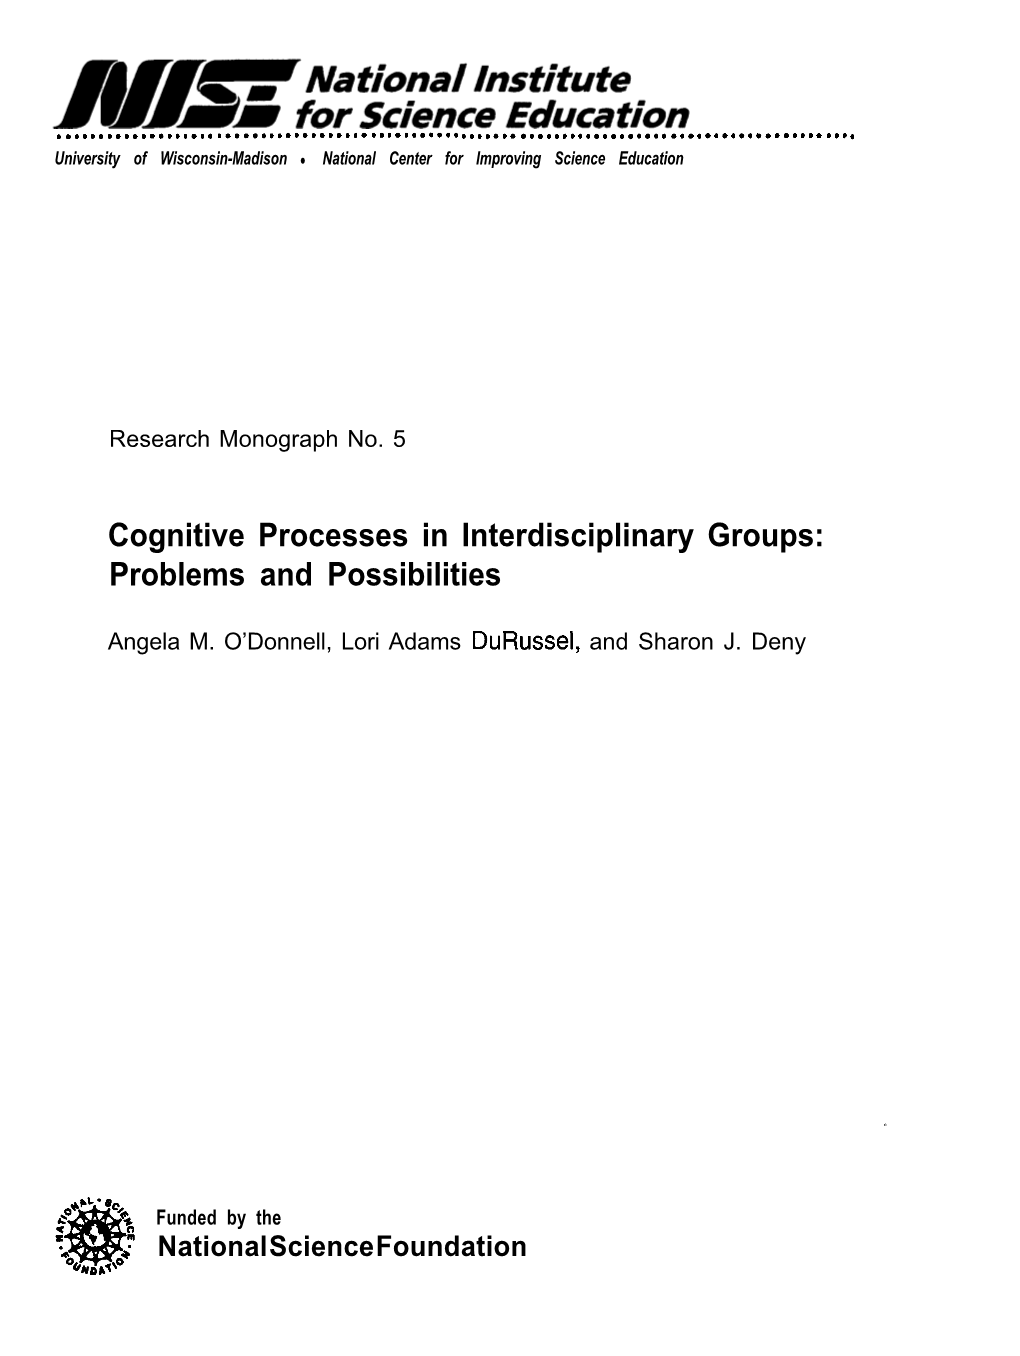 Cognitive Processes in Interdisciplinary Groups: Problems and Possibilities